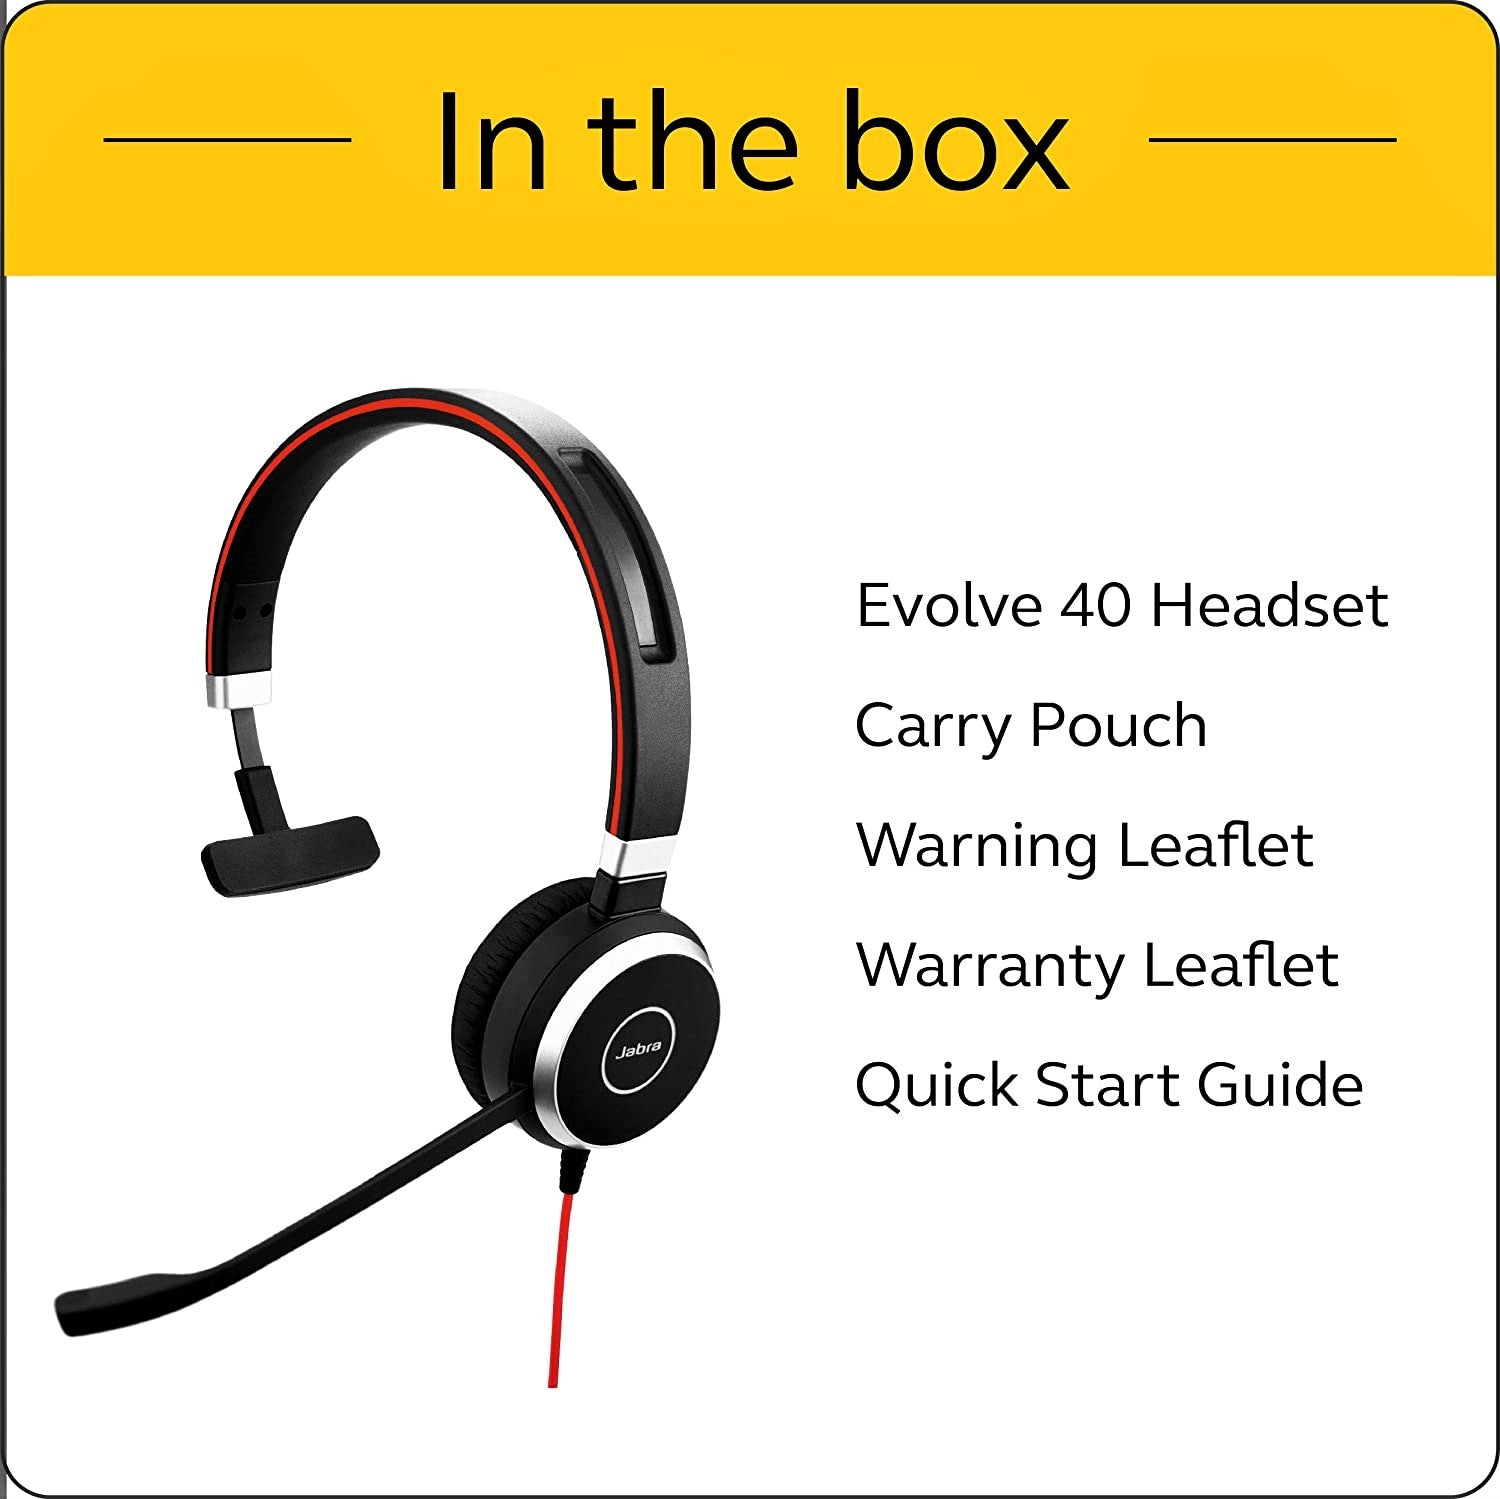 Jabra Evolve 40 UC Professional Wired Headset, Mono – Telephone Headset for Greater Productivity, Superior Sound for Calls and Music, 3.5mm Jack/USB Connection, All-Day Comfort Design, MS Optimized, Black, Mono Speaker (6393-823-209)